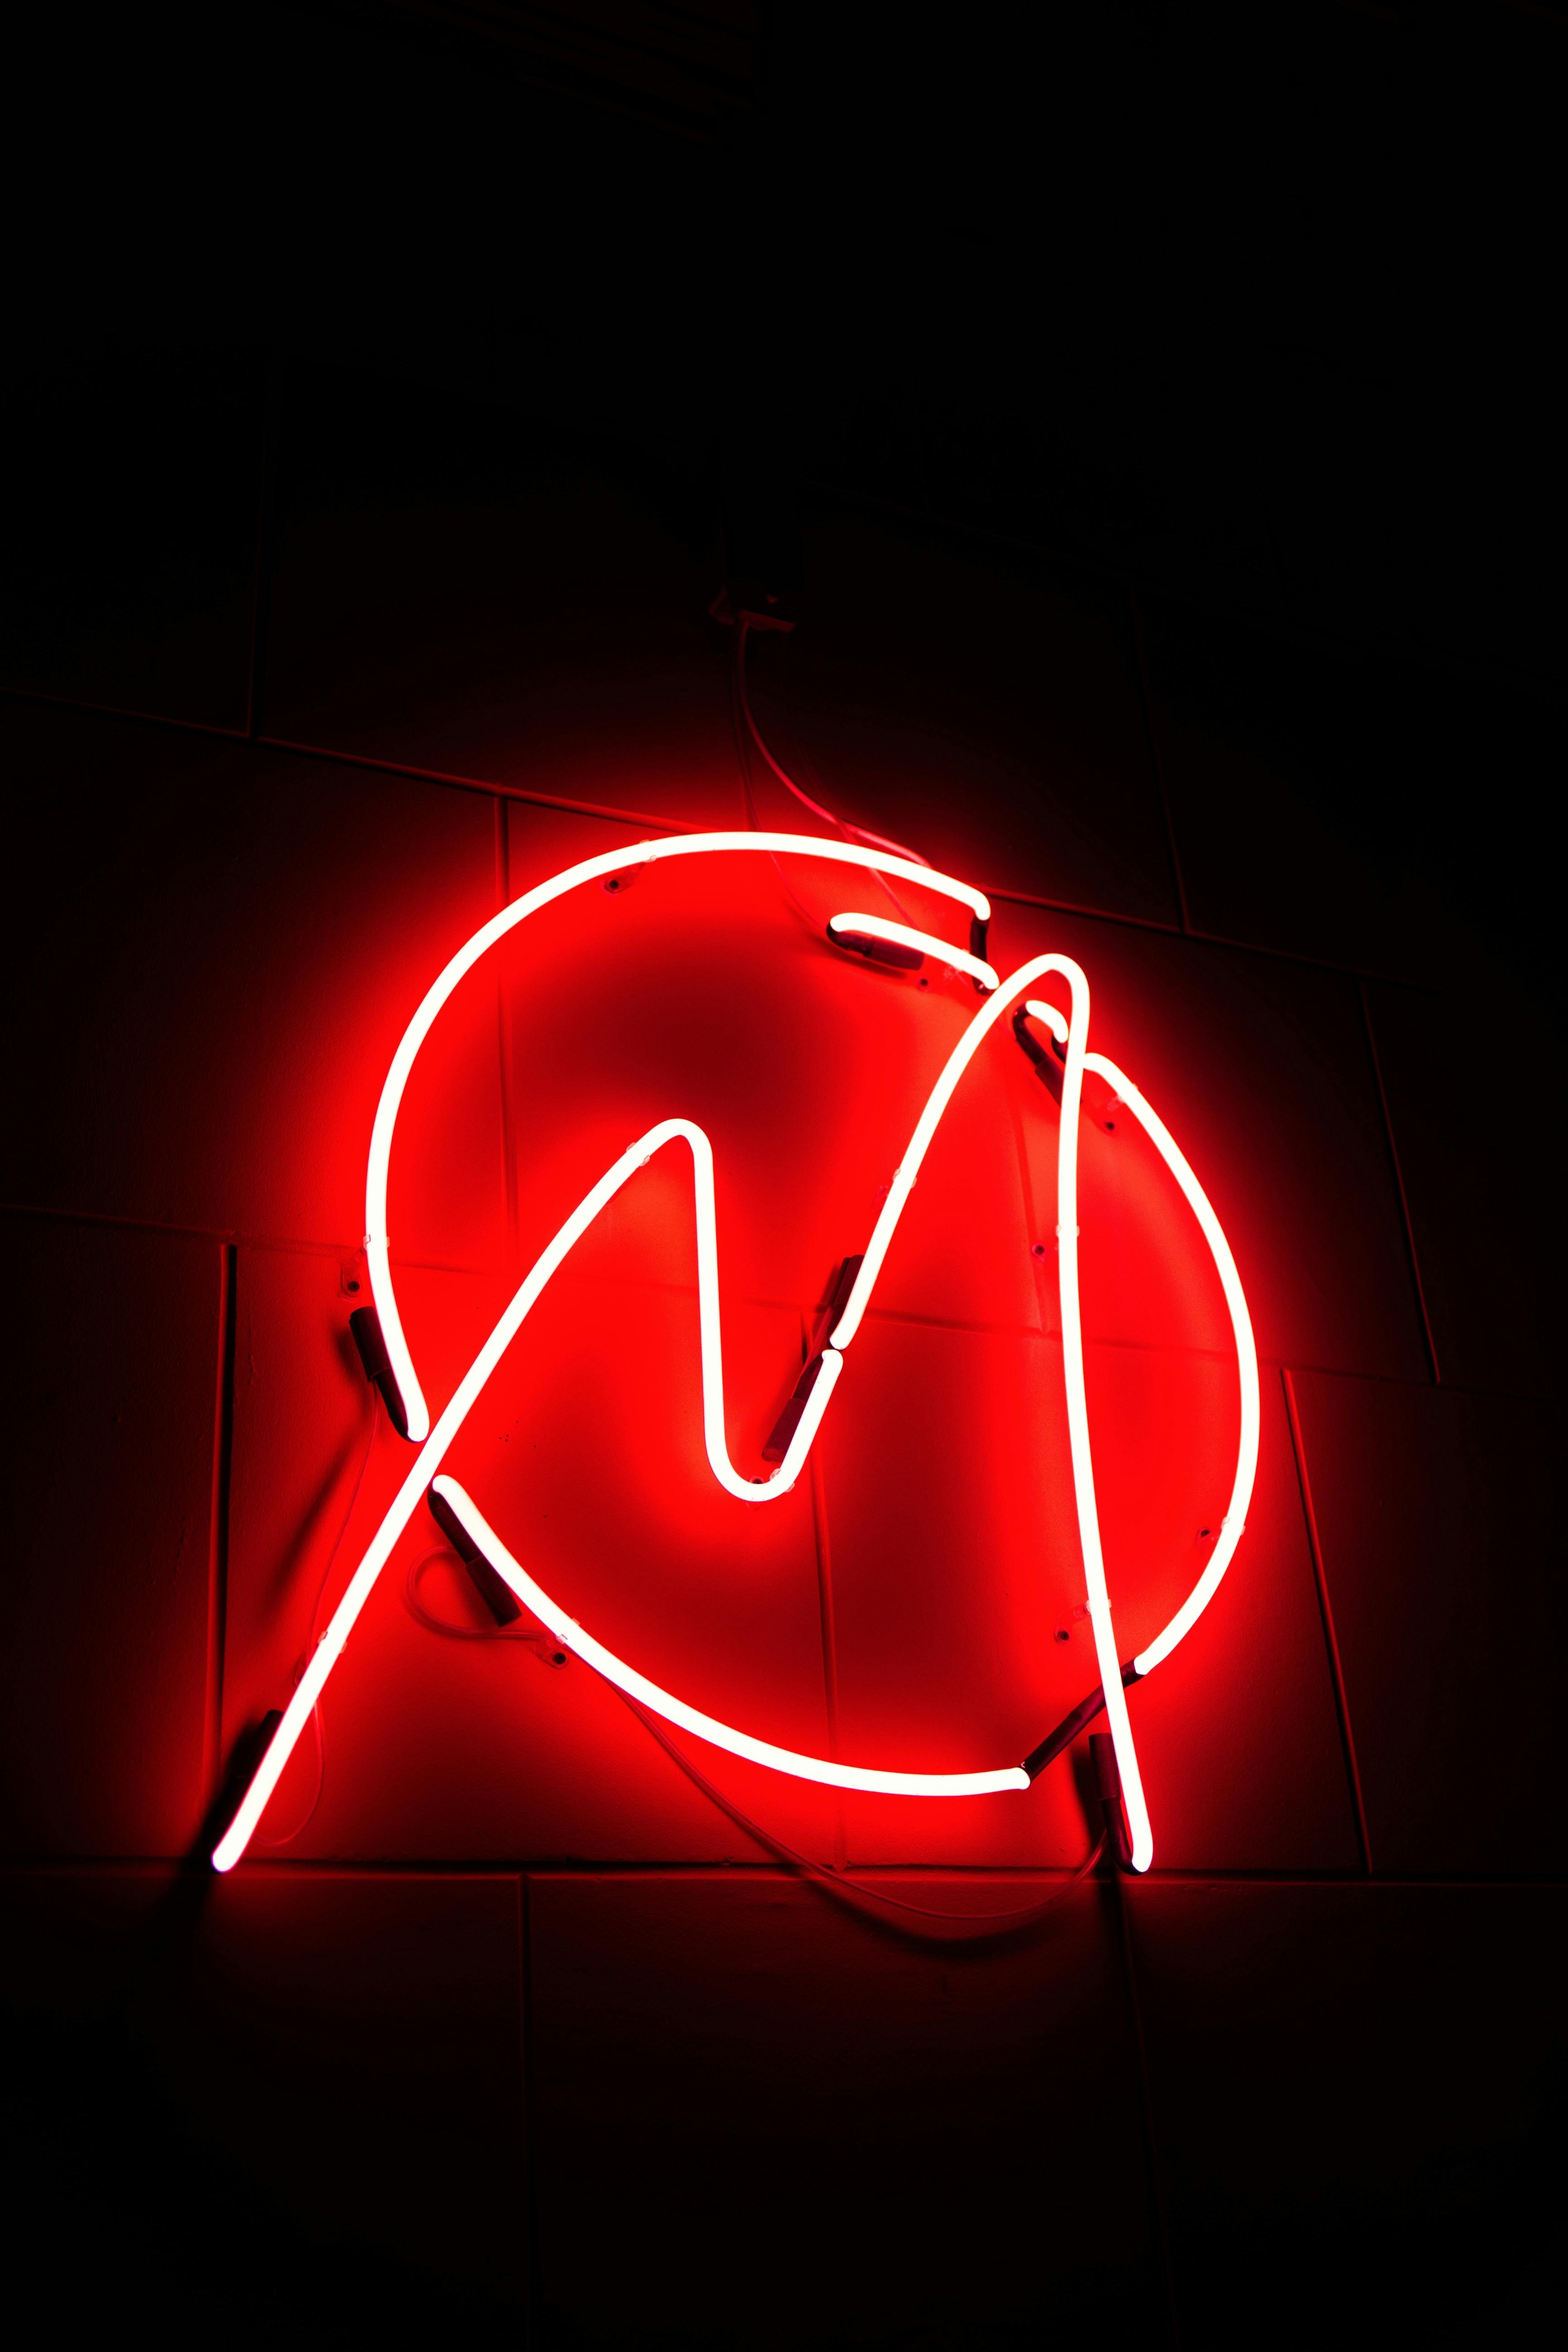 81900 Red Neon Lights Stock Photos Pictures  RoyaltyFree Images   iStock  Red neon lights background